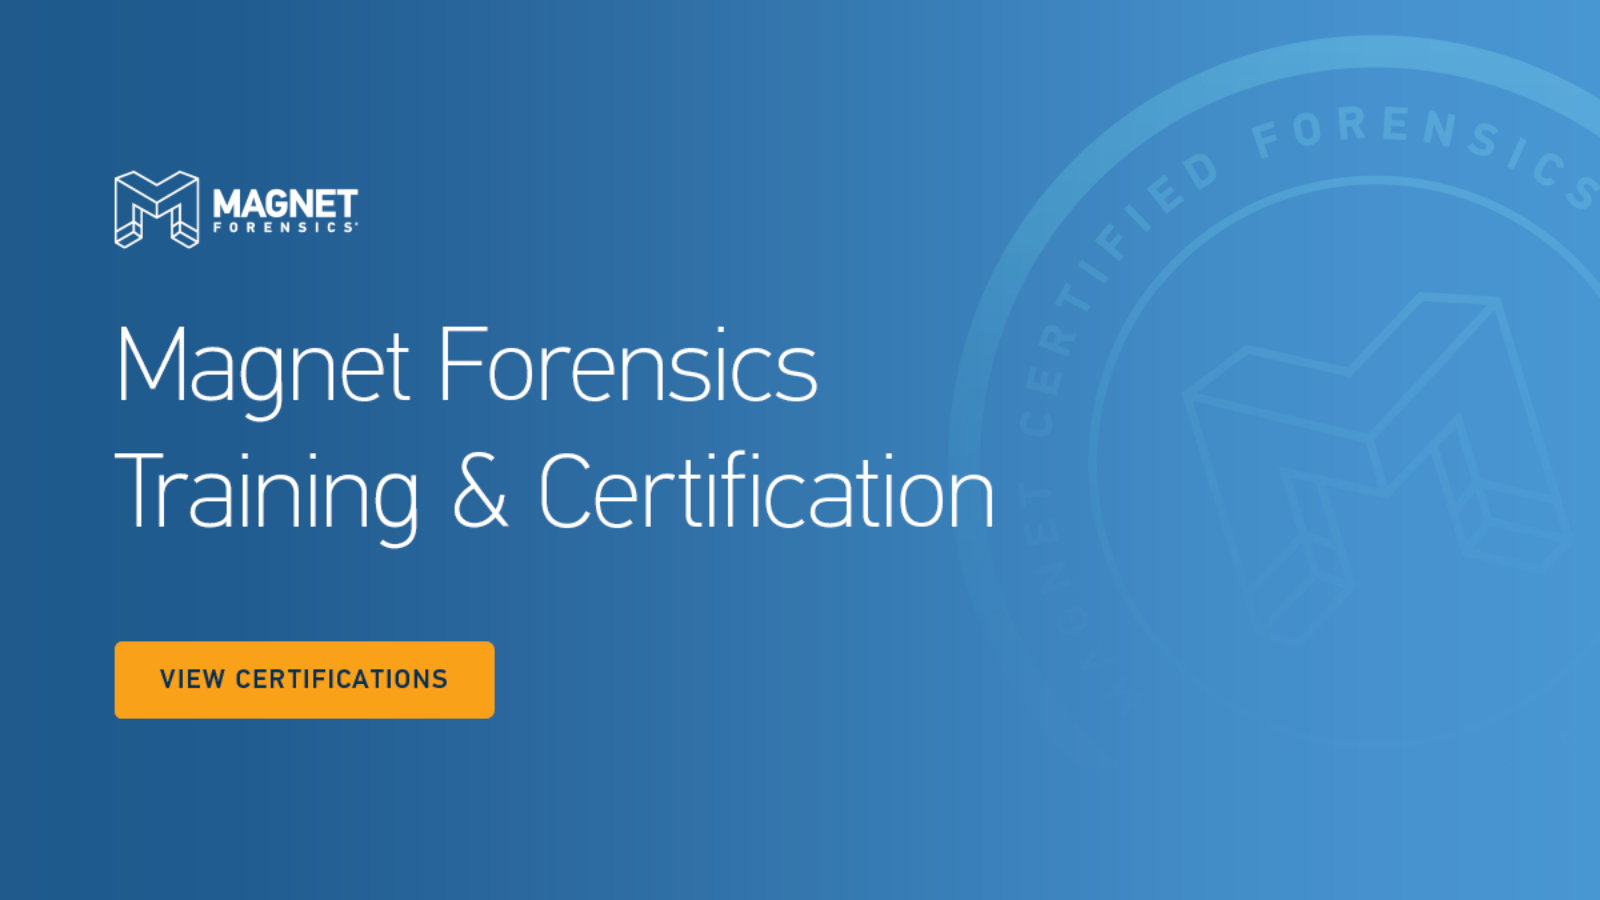 Three New Magnet Forensics Certifications Now Available to Expertise - Forensic Focus